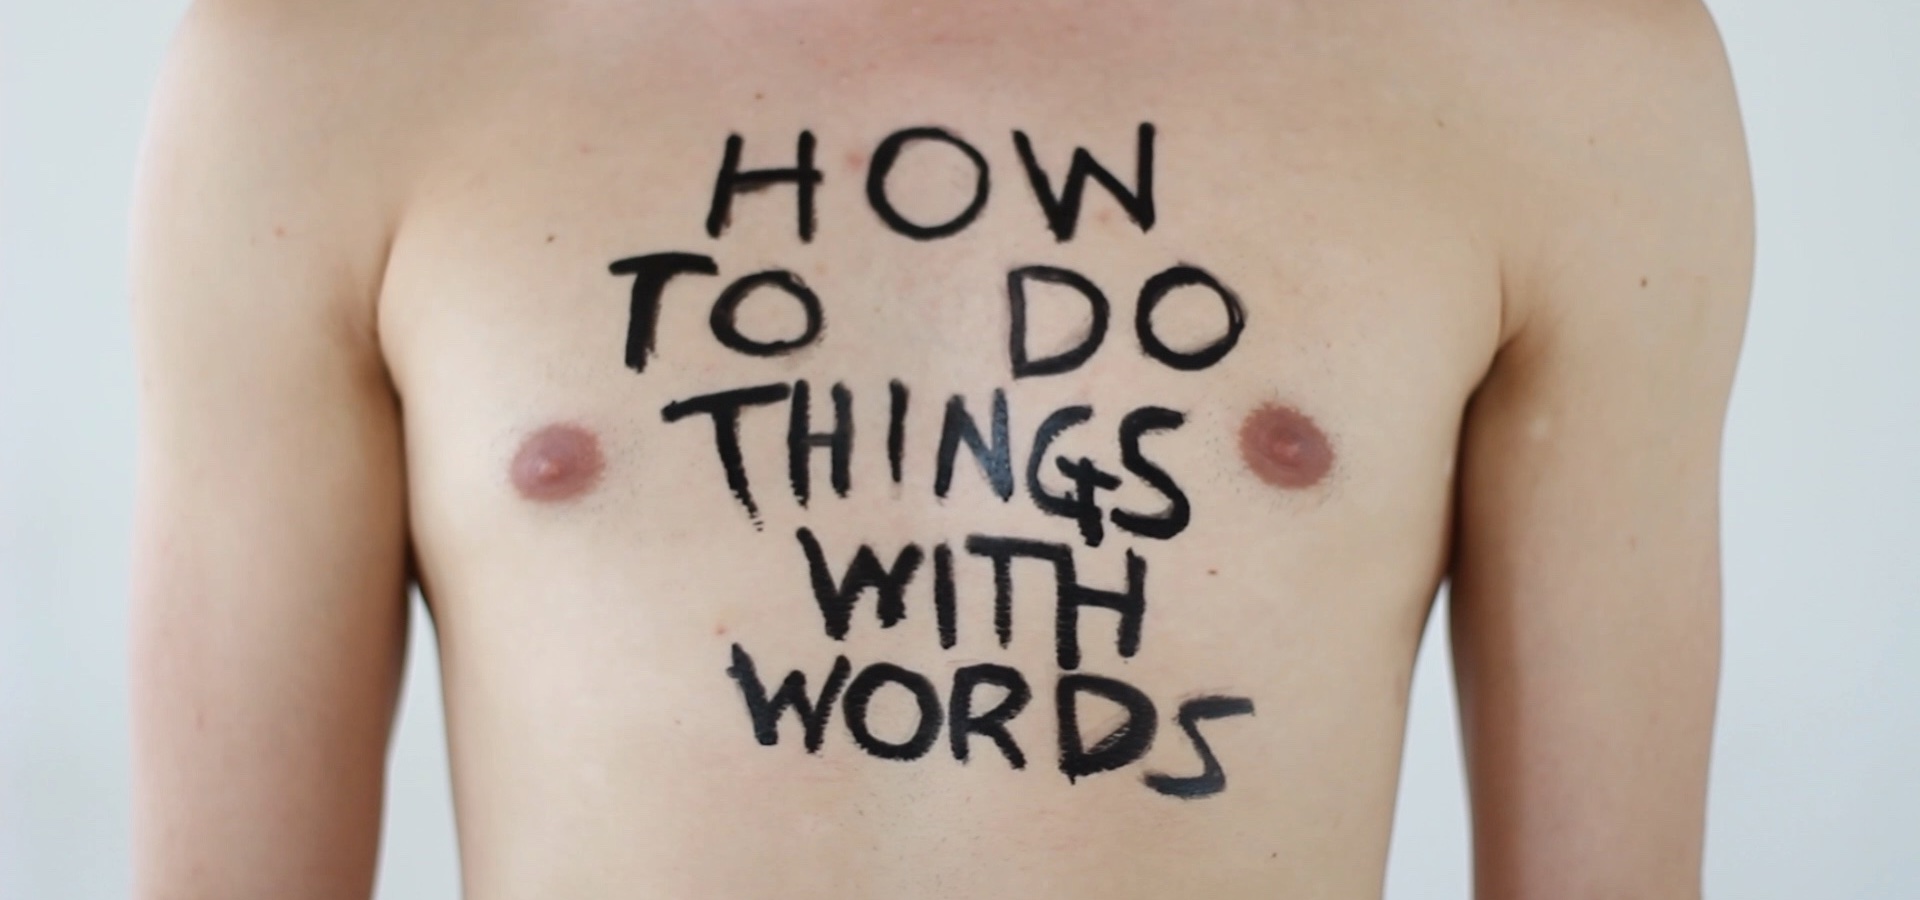 How to do things with words